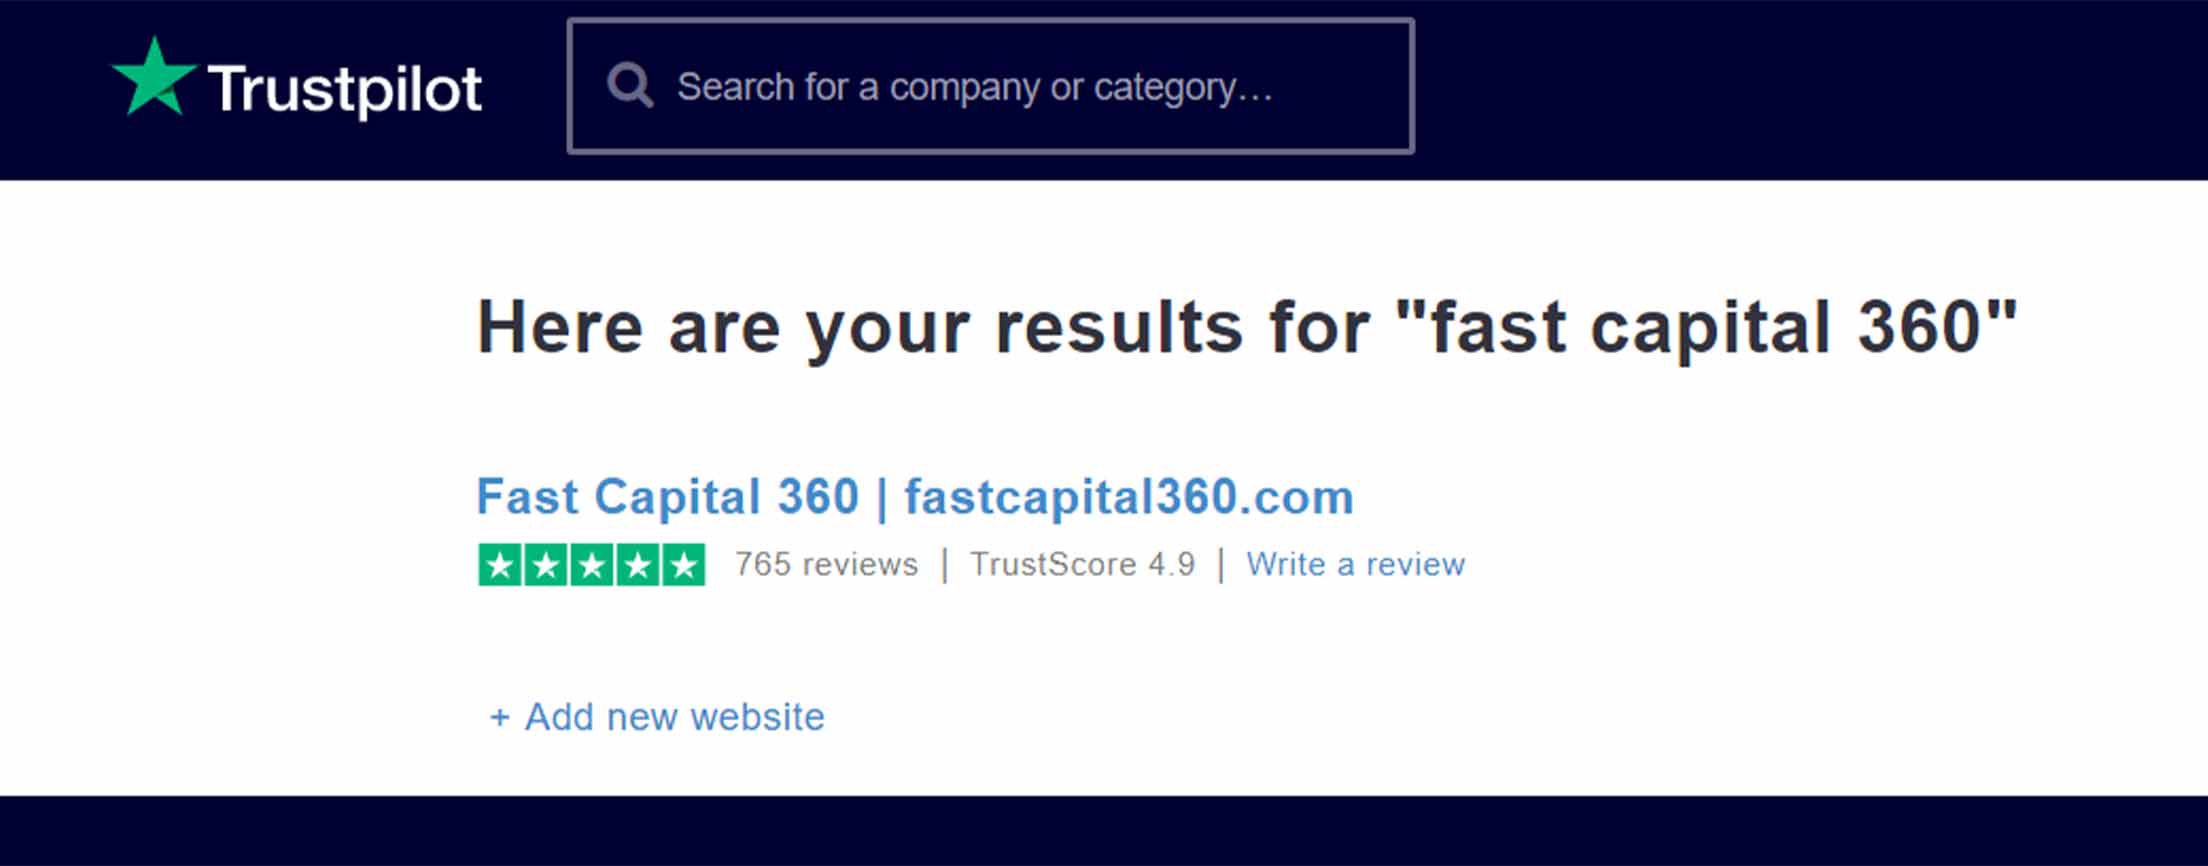 Trustpilot’s website showing ratings for Fast Capital 360, which has earned 5 stars out of 765 reviews.